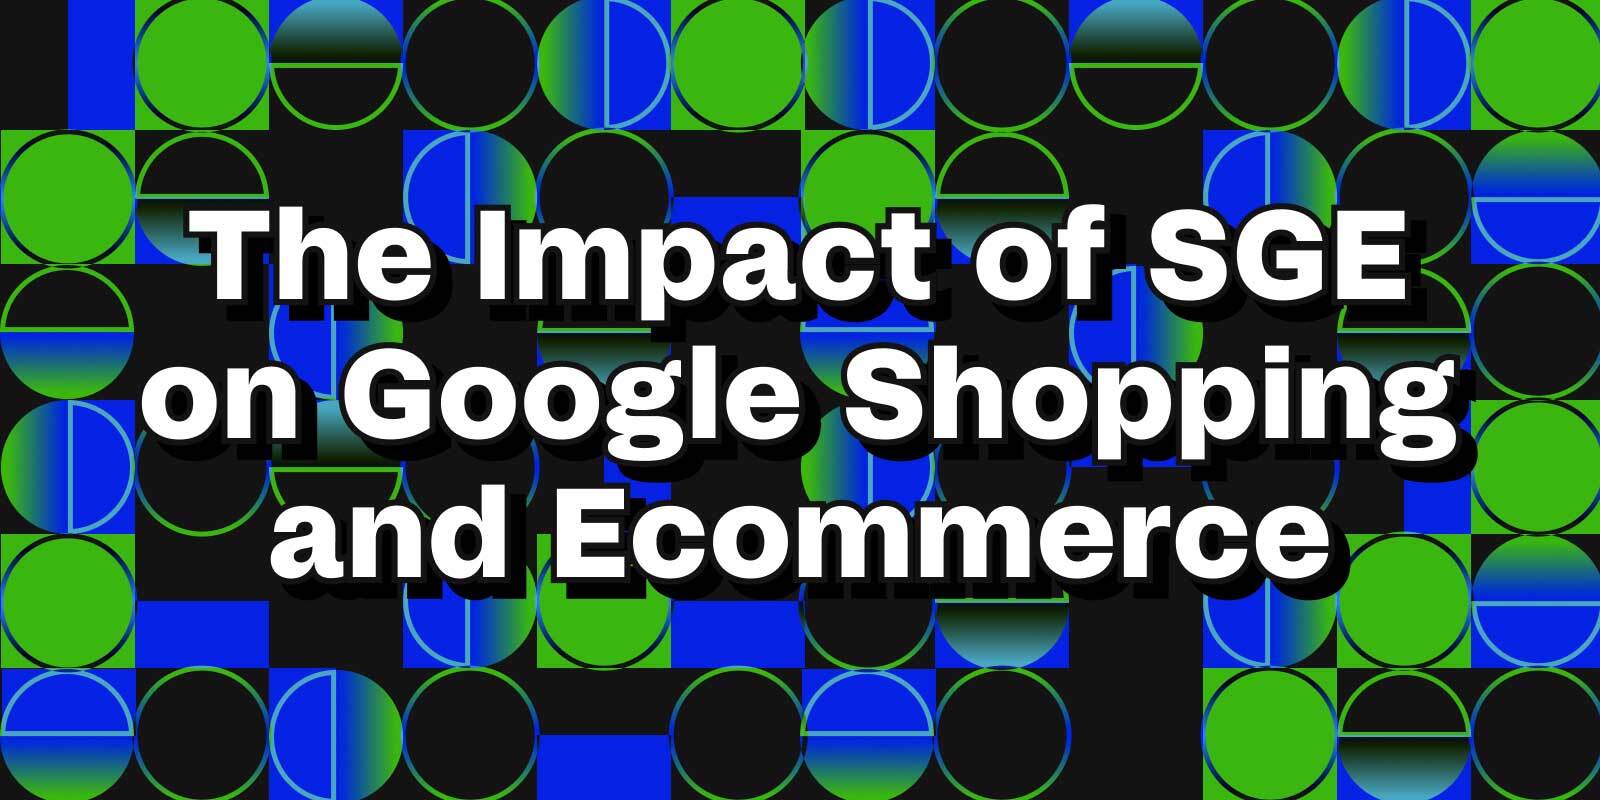 The impact of SGE on Google Shopping and Ecommerce